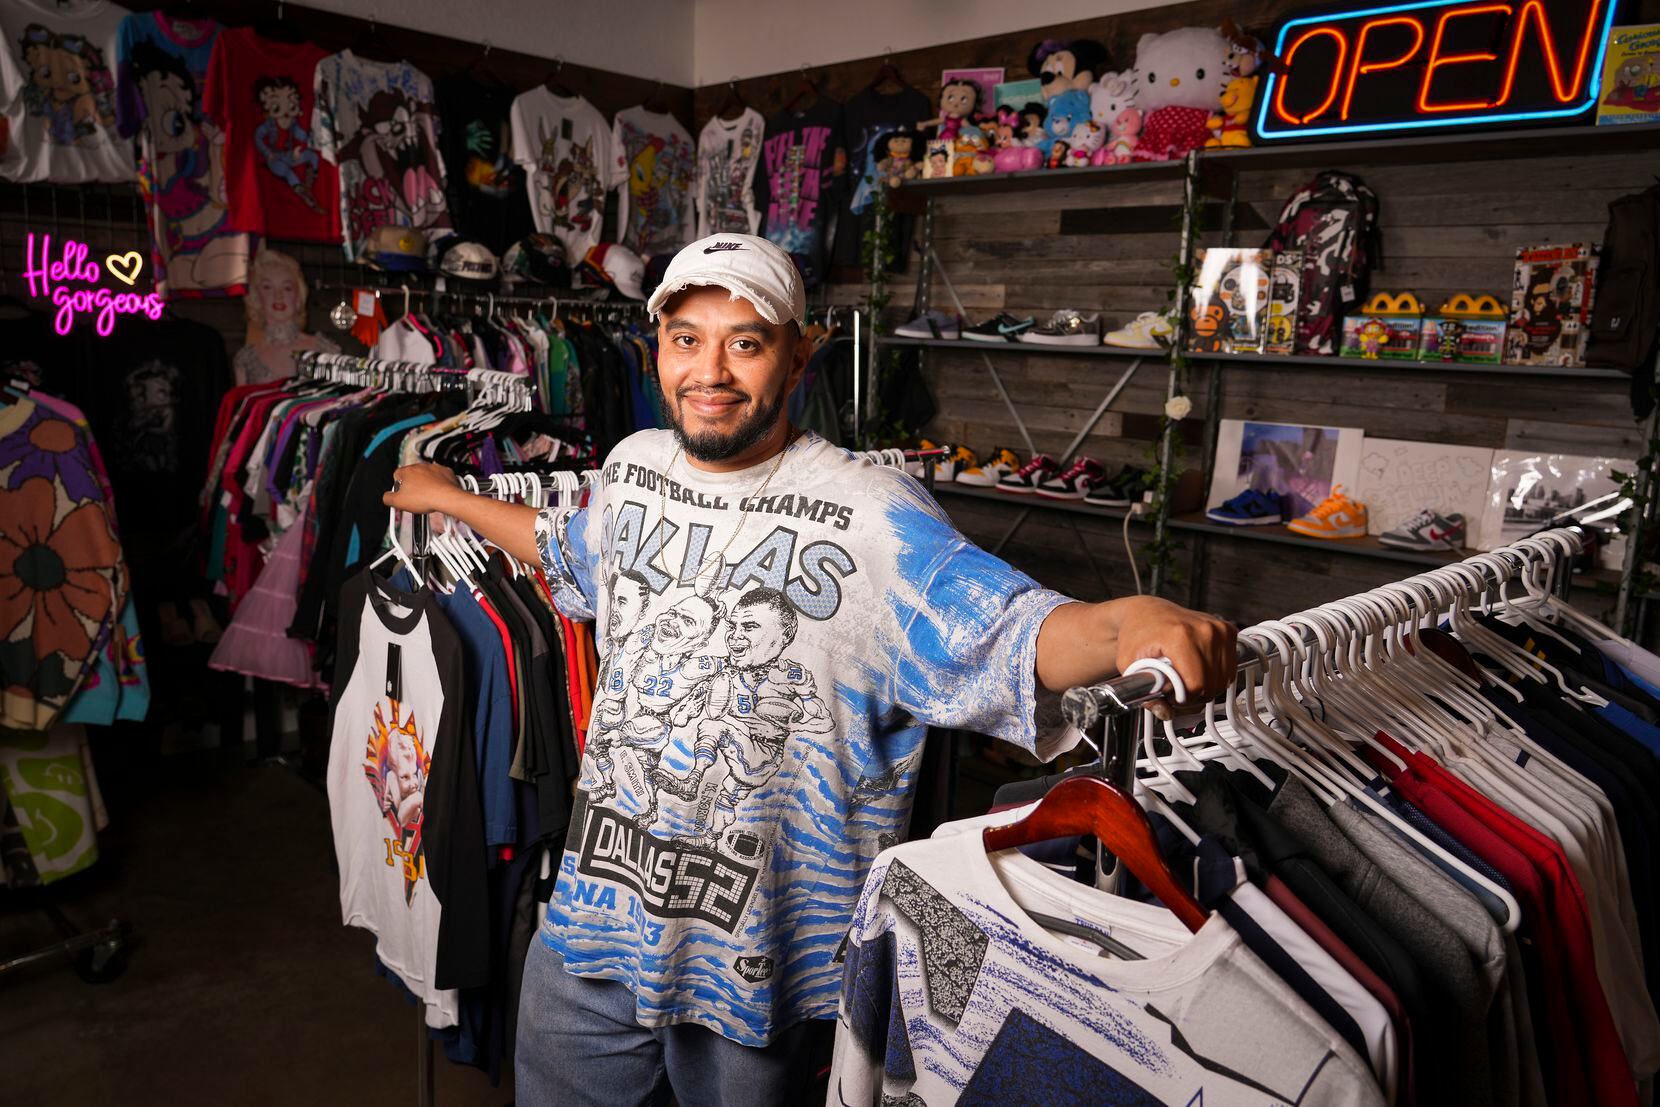 Jorge Torres sold products online and at pop-up events before opening his Real Street Jams...